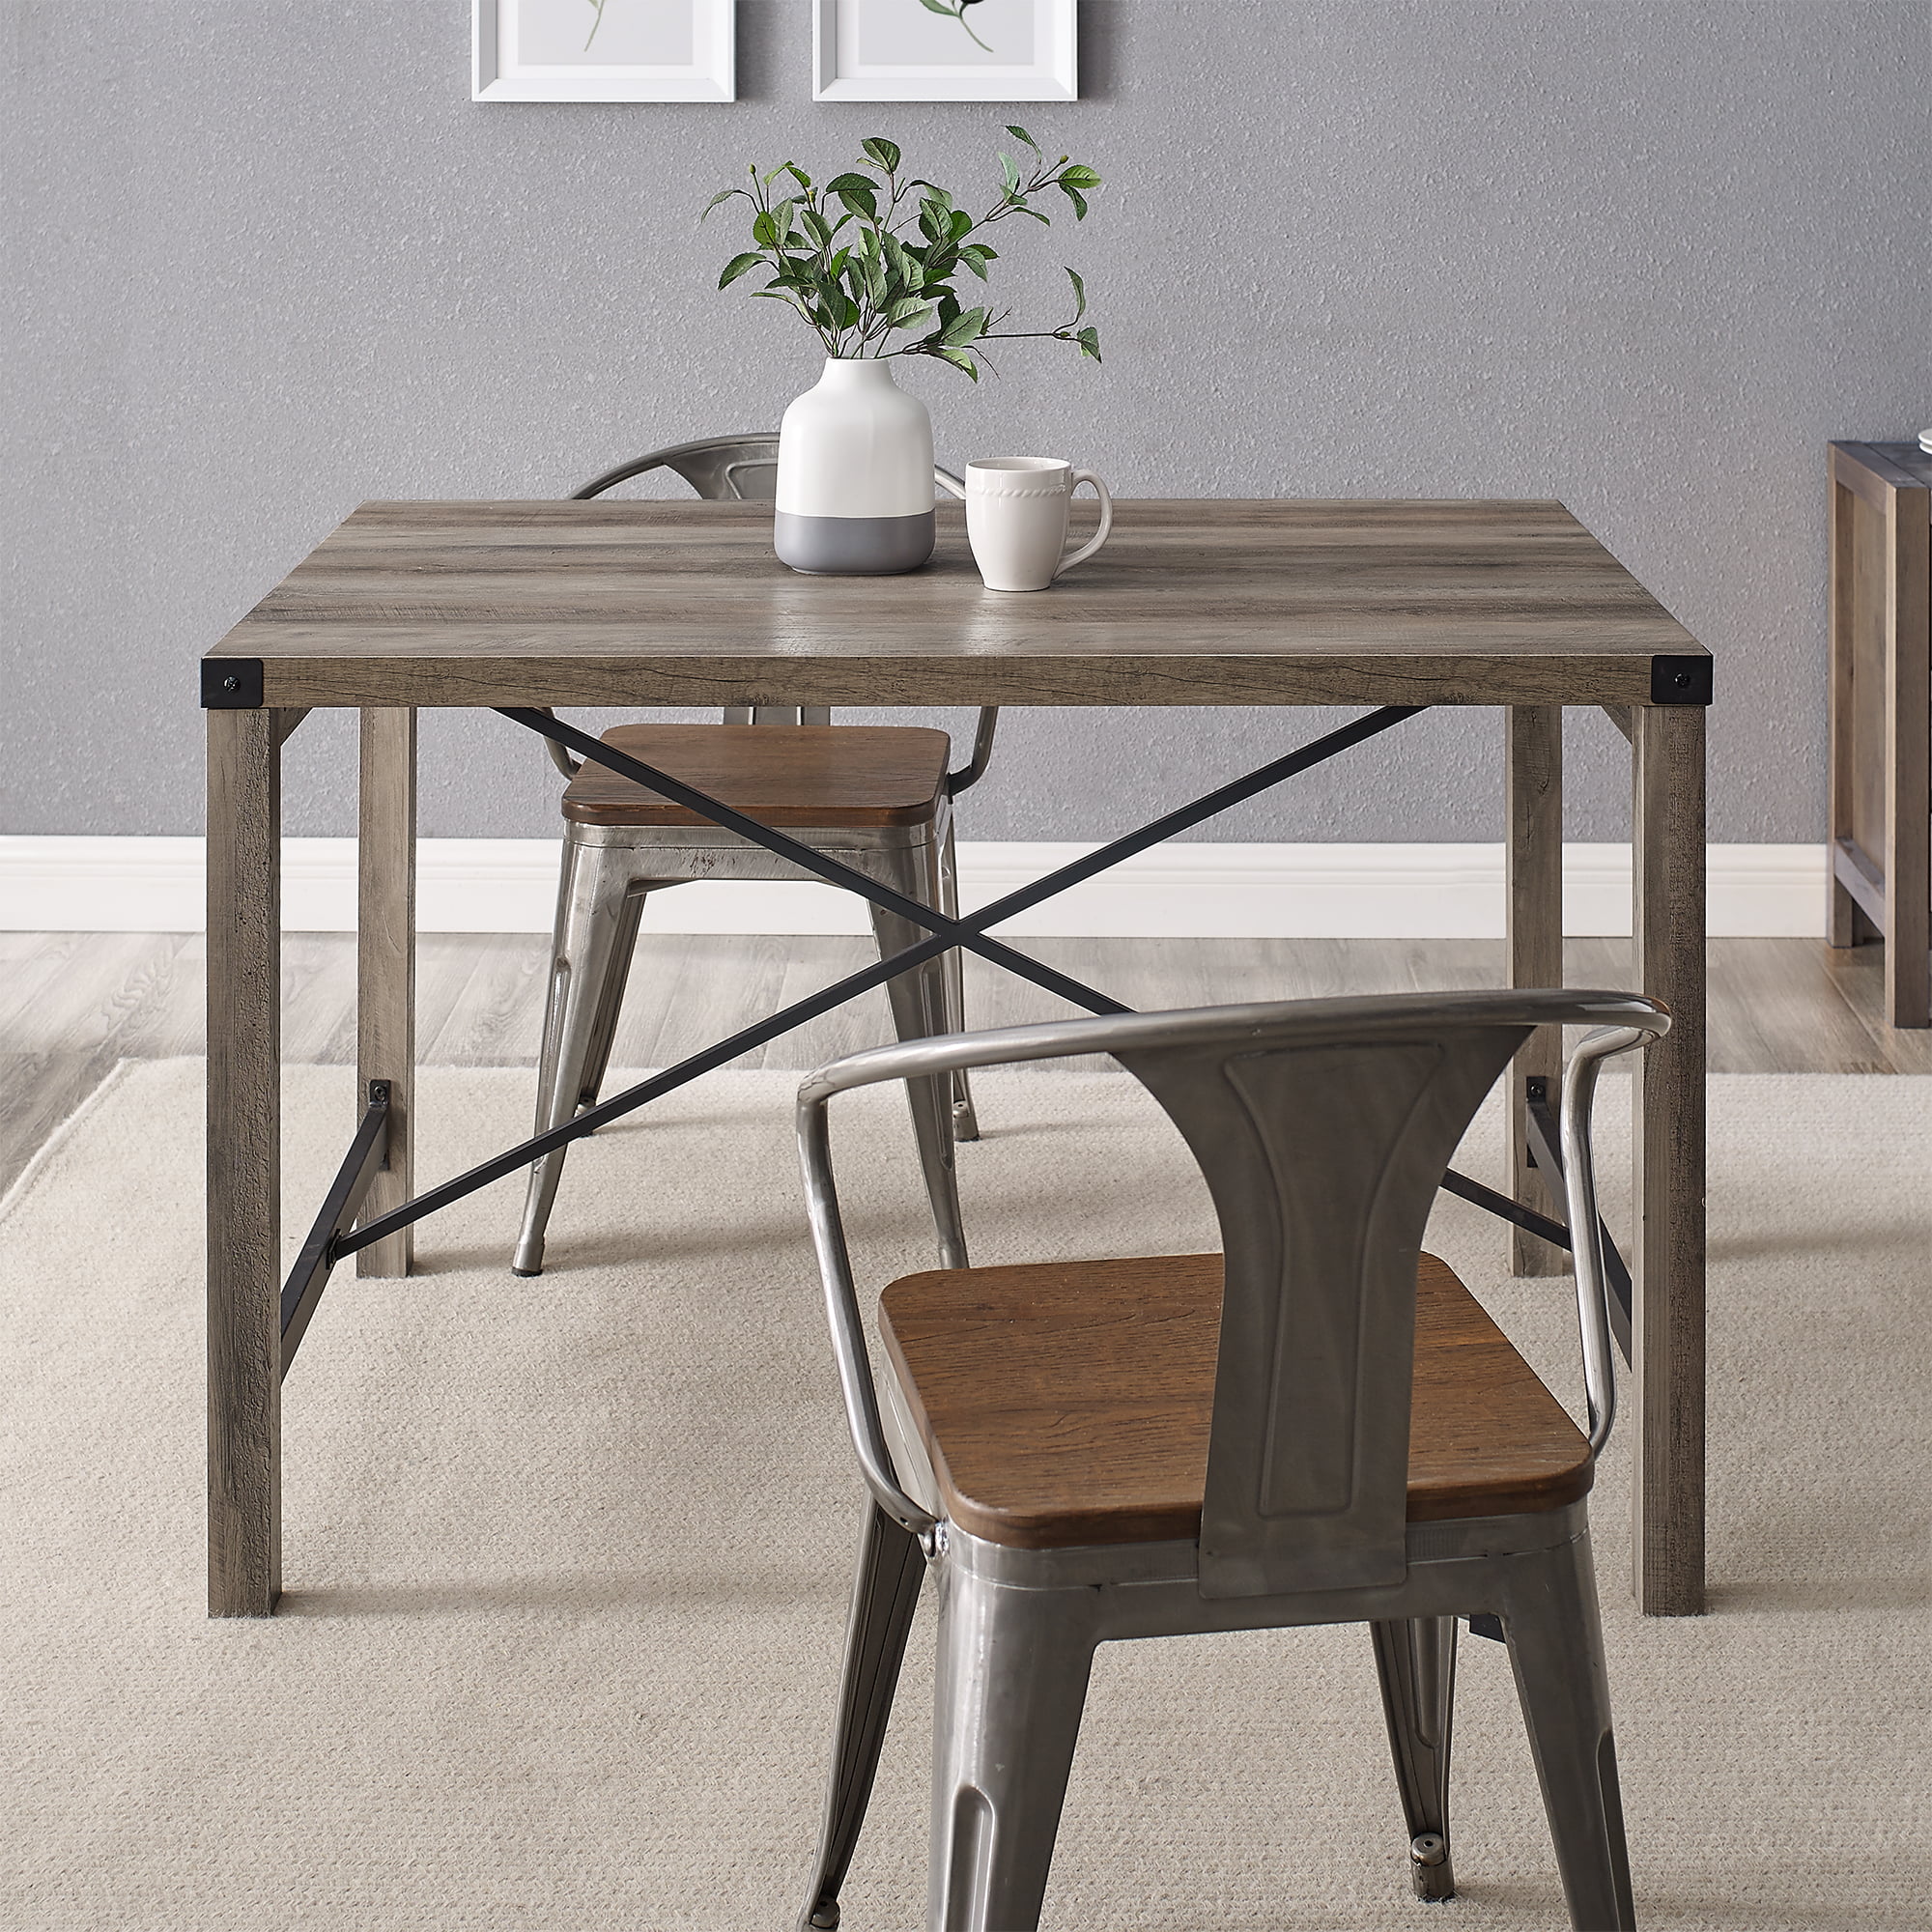 Manor Park Rustic Farmhouse Dining Table $68.47 at Walmart